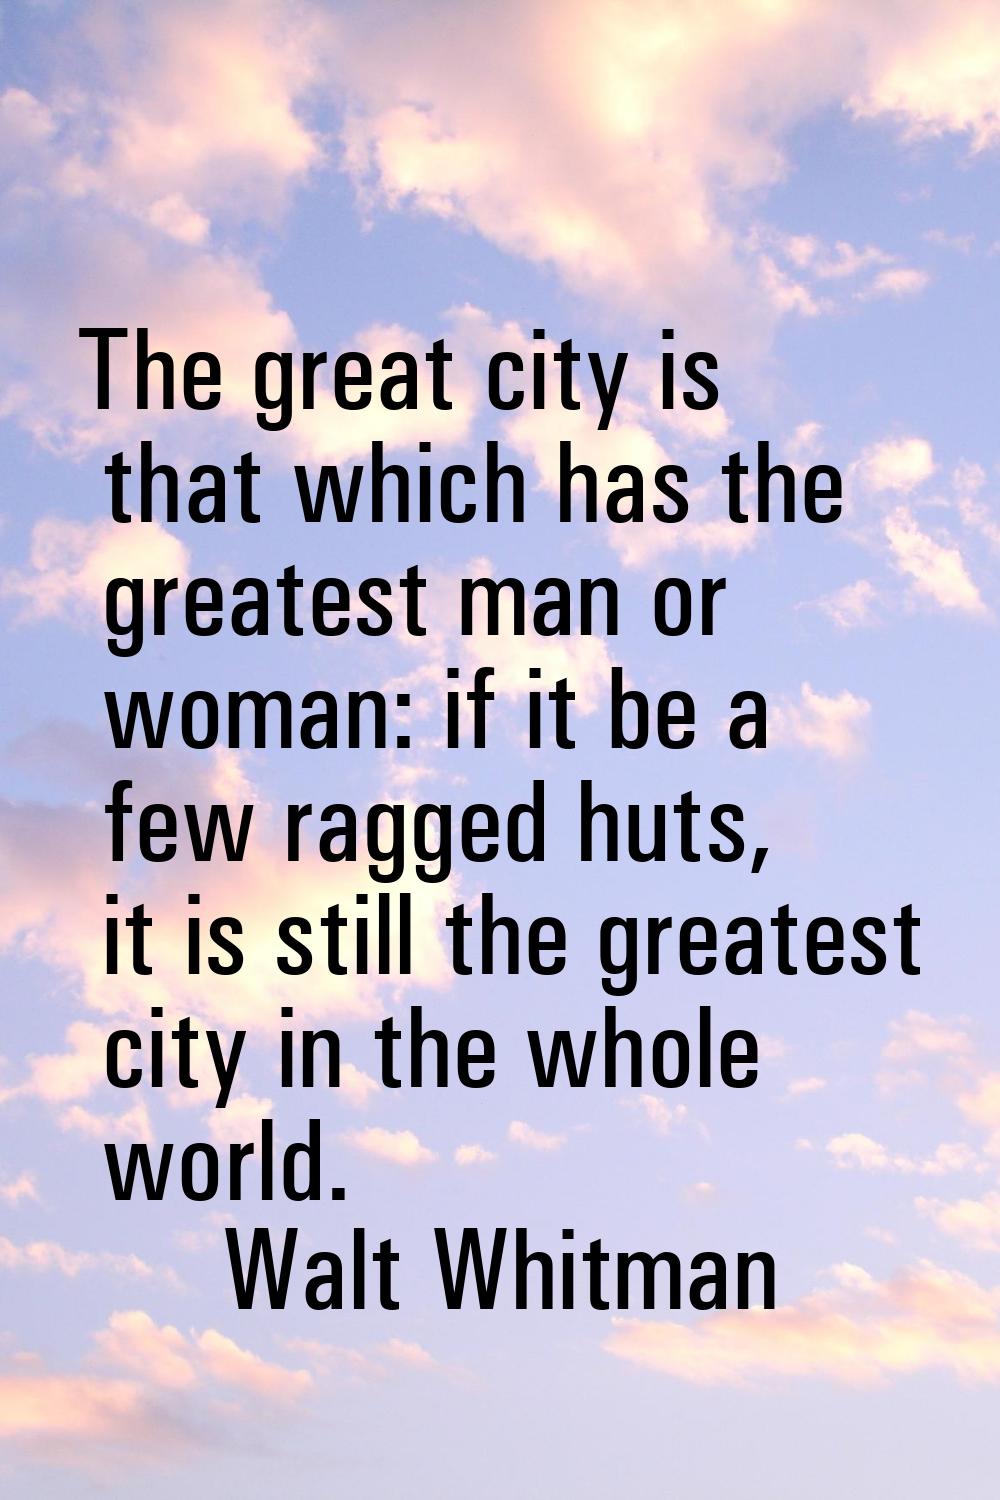 The great city is that which has the greatest man or woman: if it be a few ragged huts, it is still